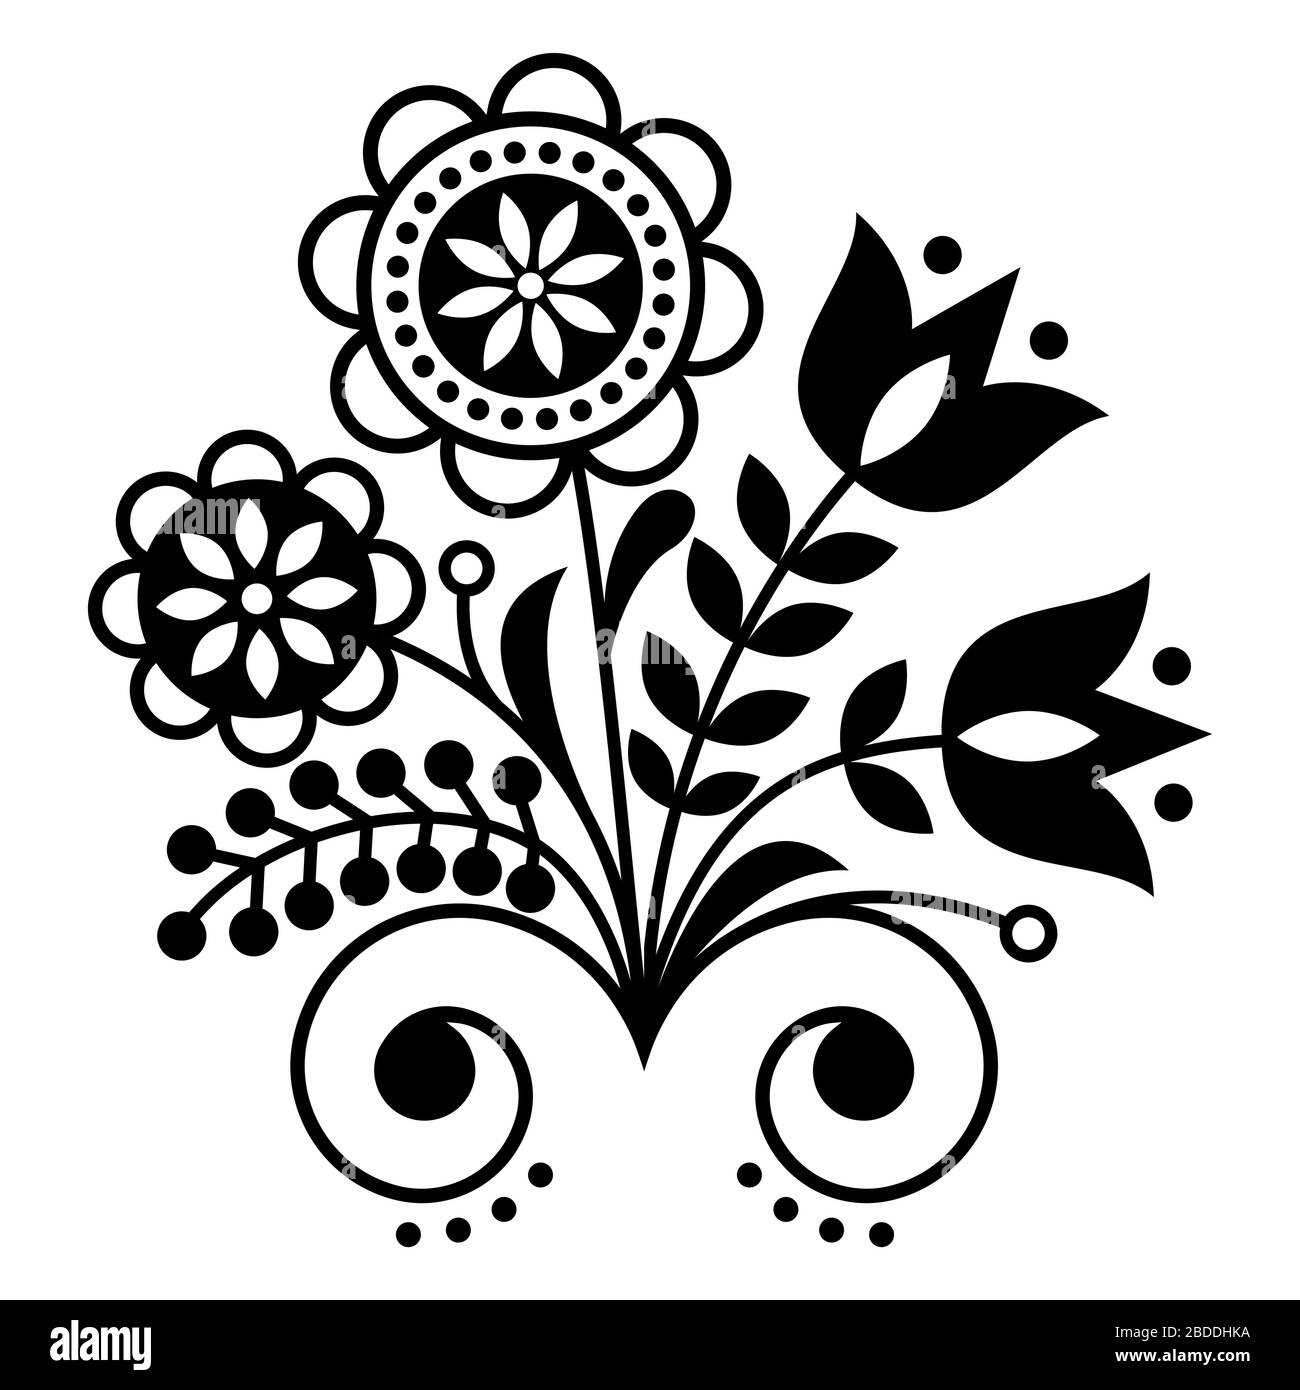 Scandinavian folk art ornament with flowers, Nordic floral design, retro background in black and white Stock Vector